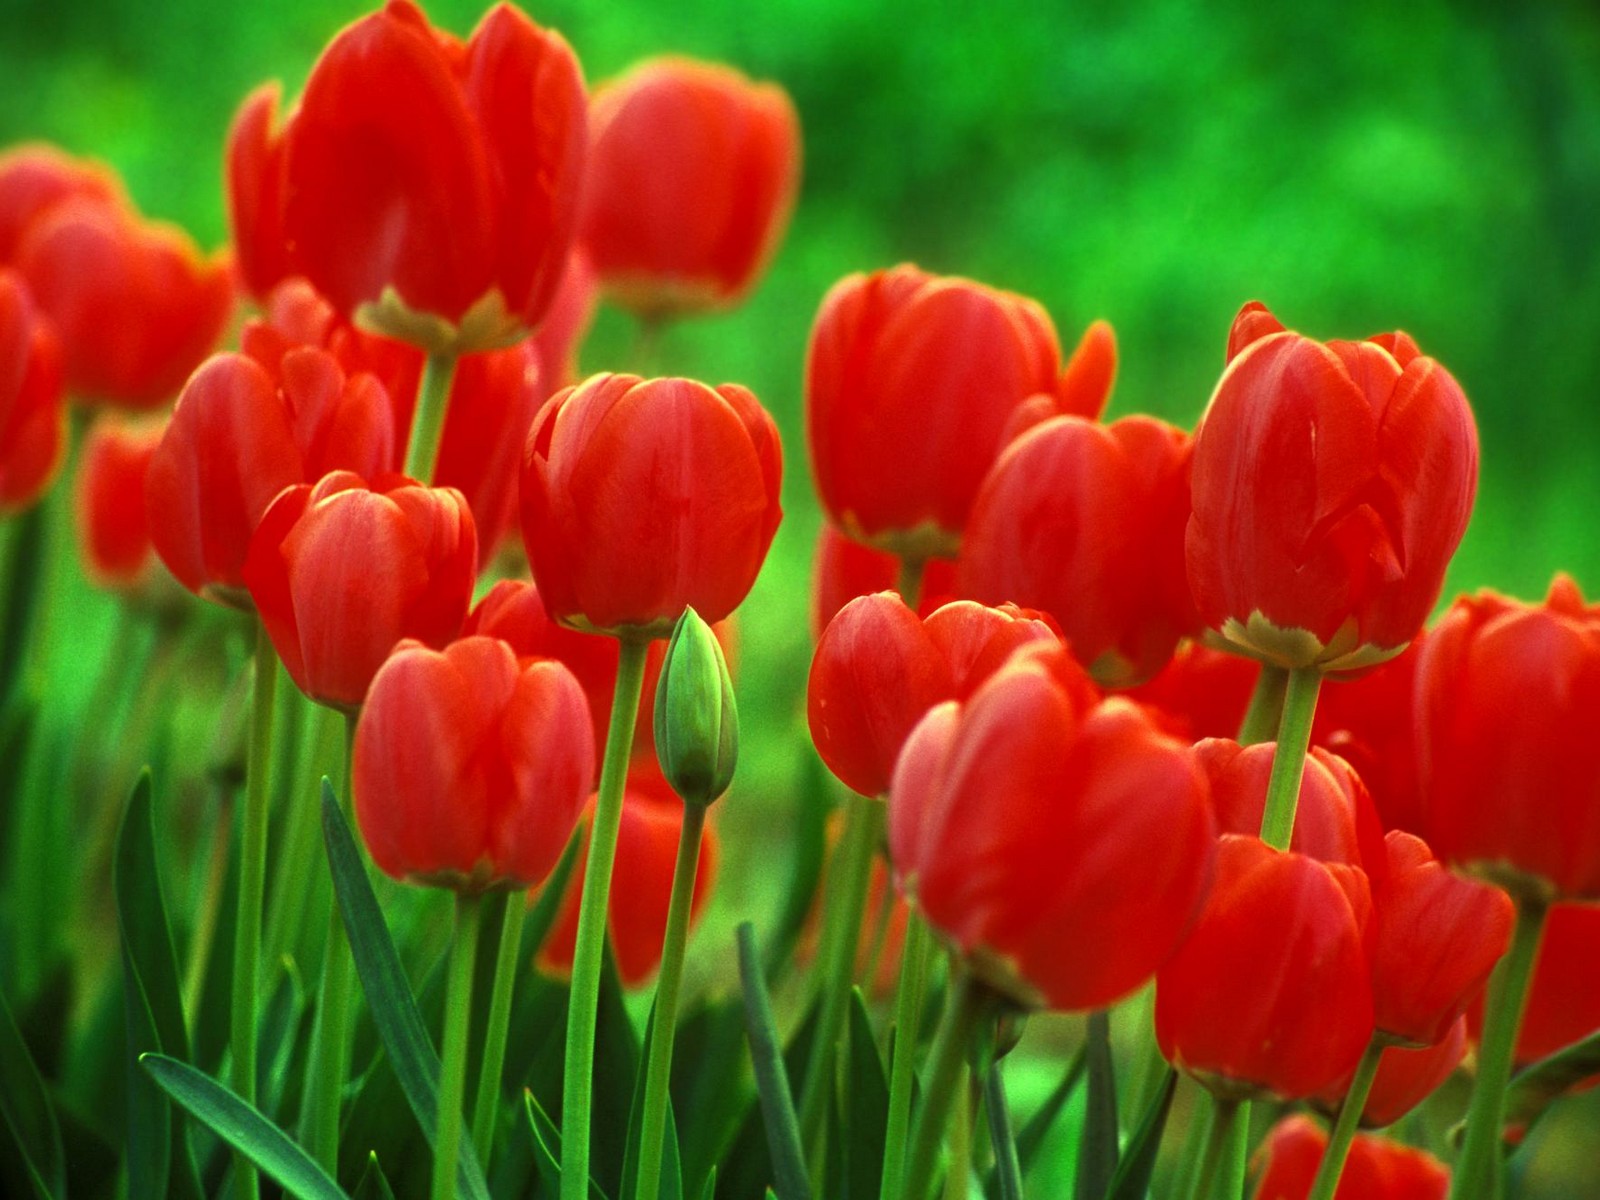 Download Free Wallpaper|Wallpapers for mac|Wallpapers for desktop|Wallpaper for HD: Tulip flower